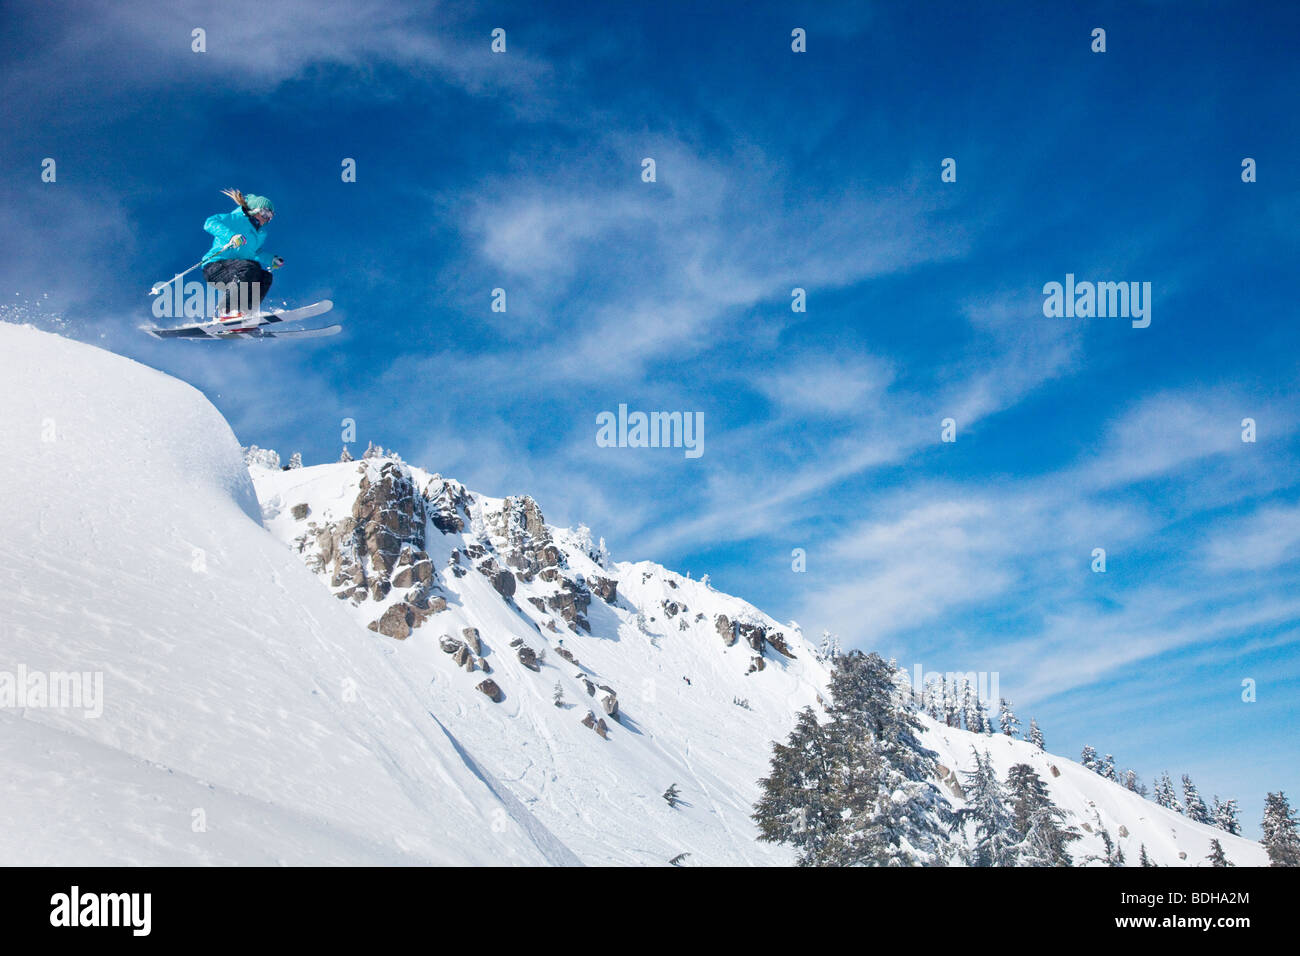 A female skier launching into fresh powder snow with mountains and blue sky in the background. Stock Photo